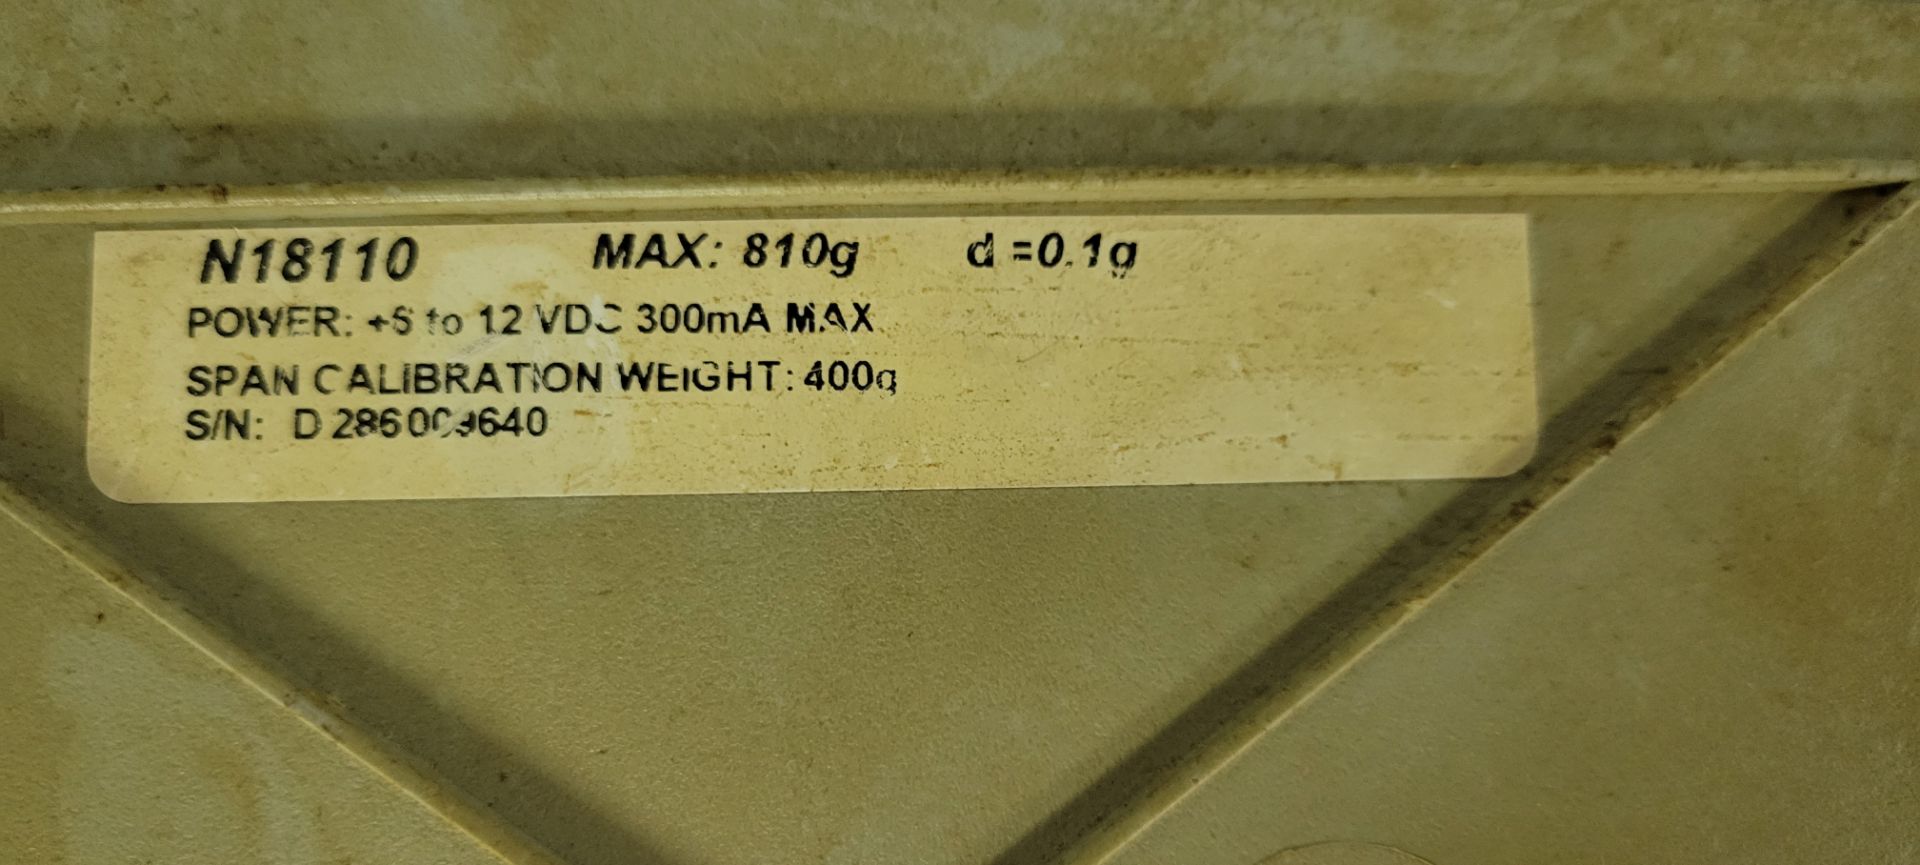 Mettler Bench Top Scale - Image 3 of 3